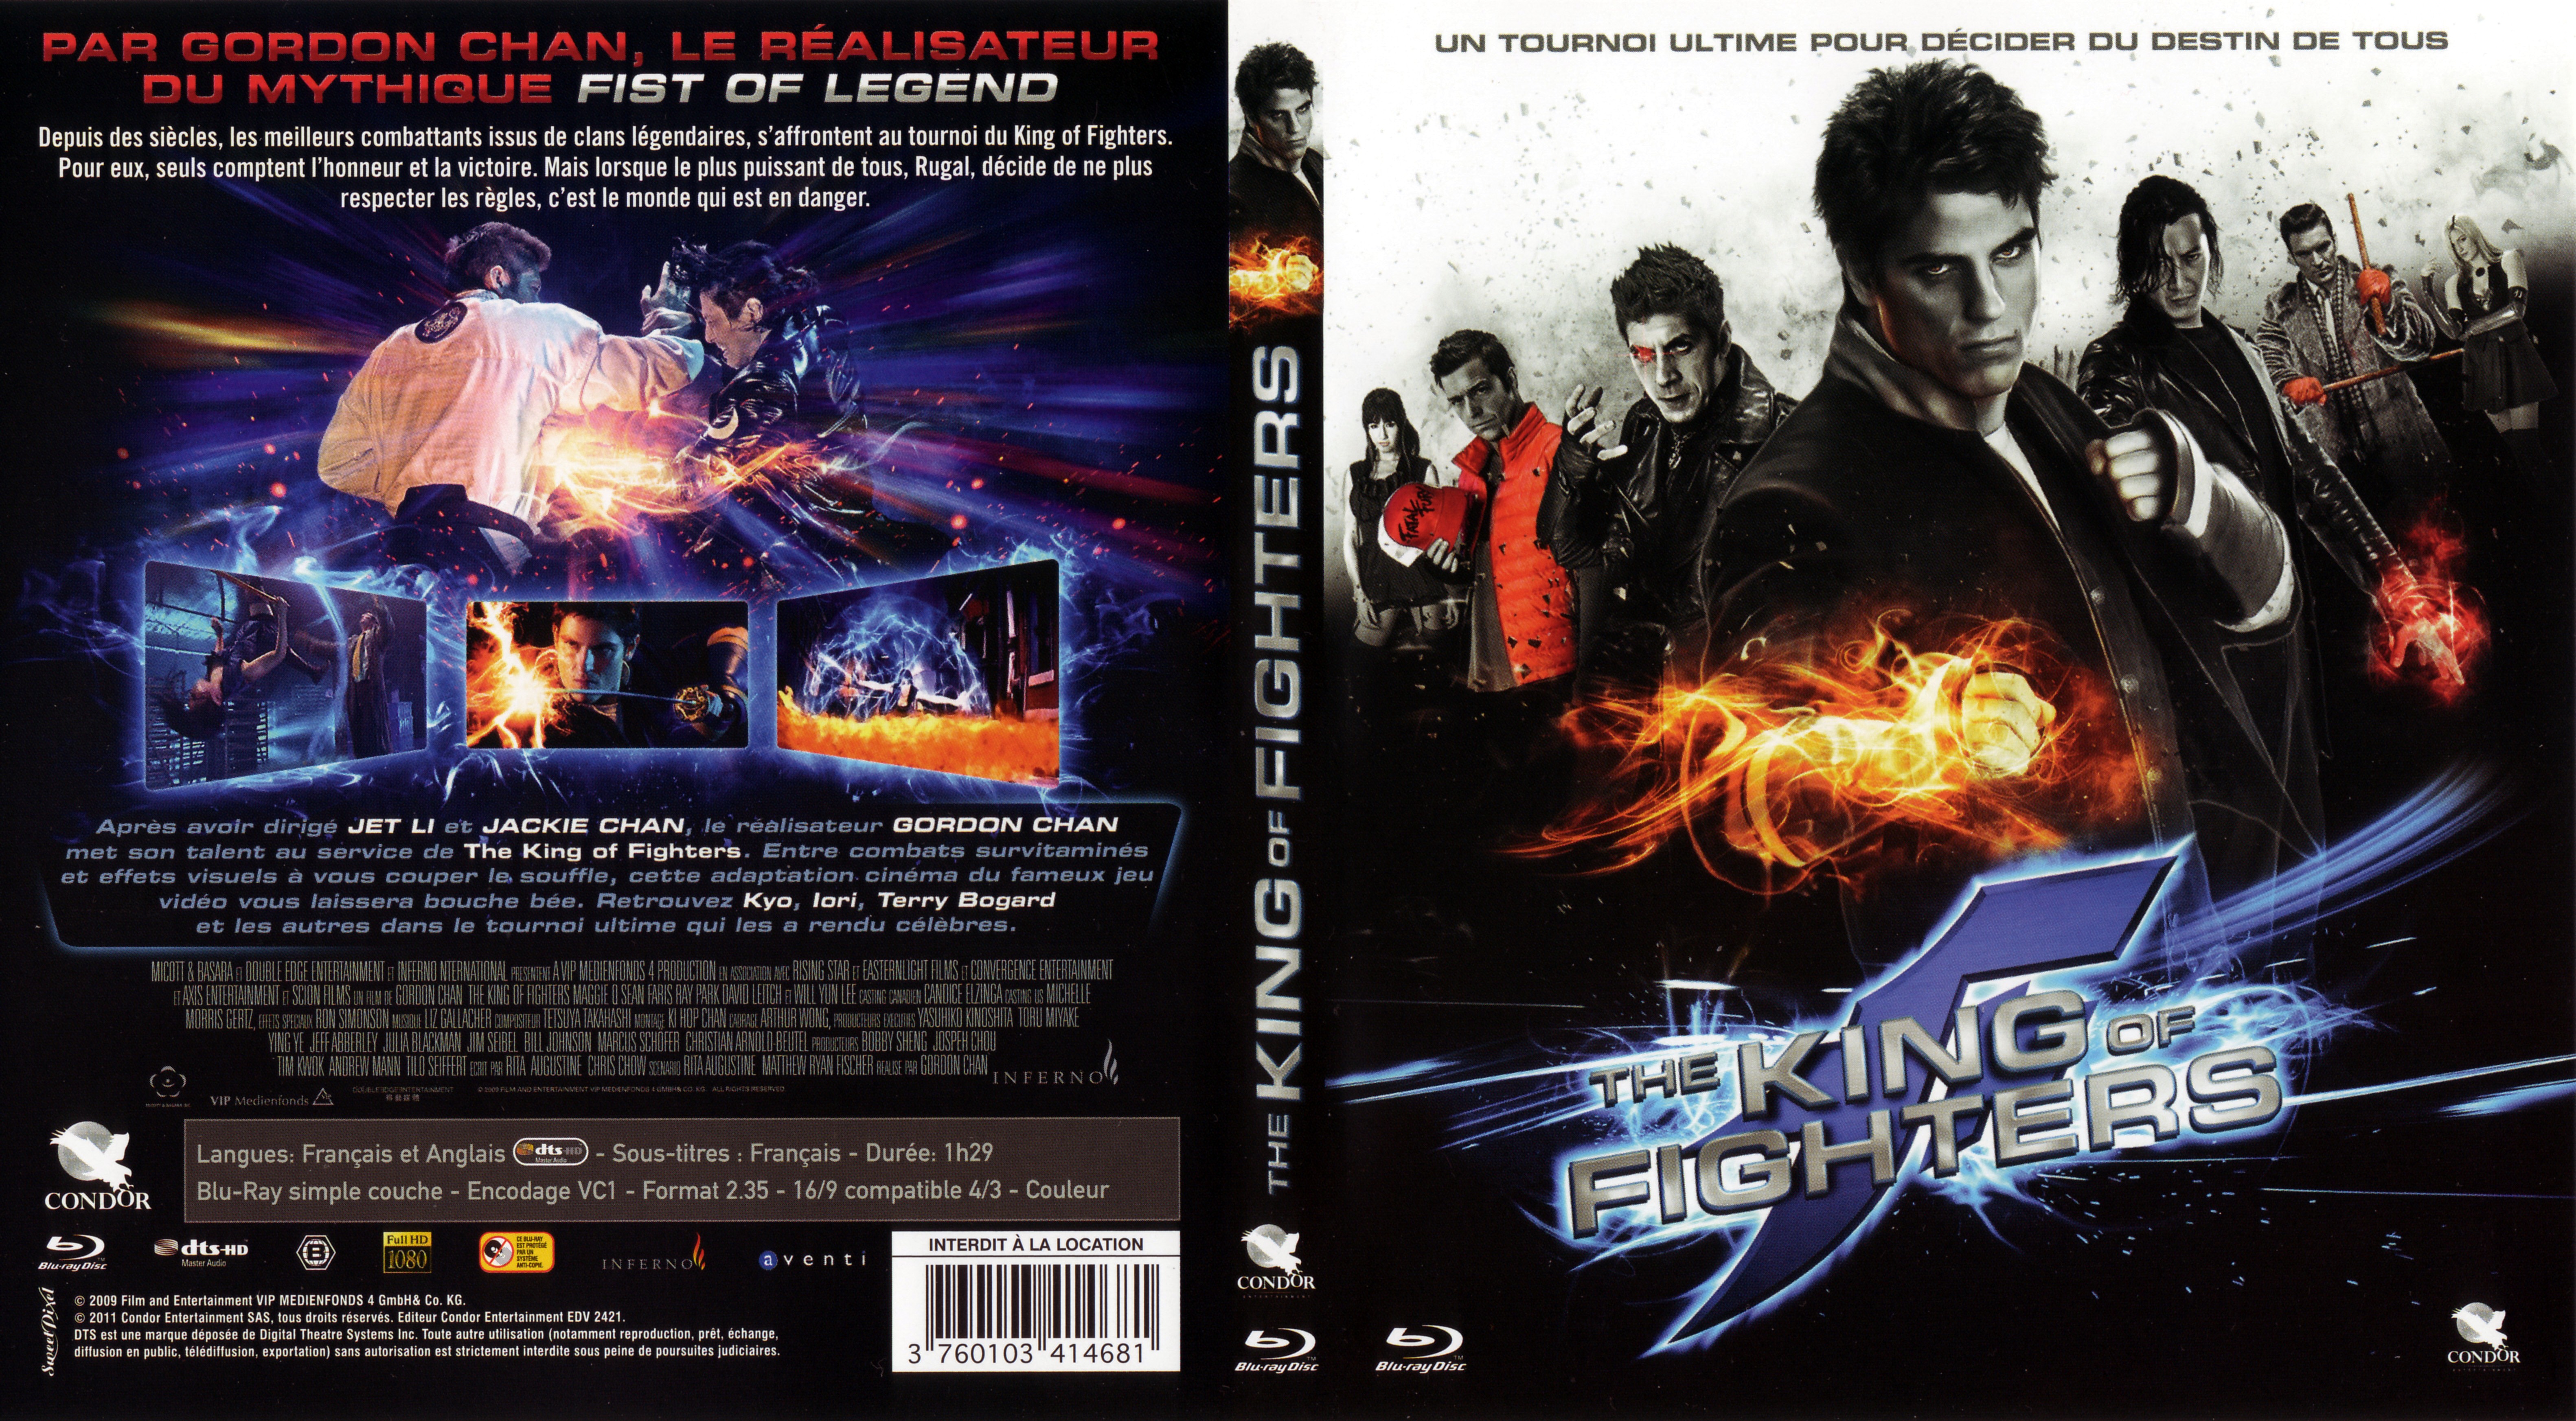 Jaquette DVD The king of fighters (BLU-RAY)